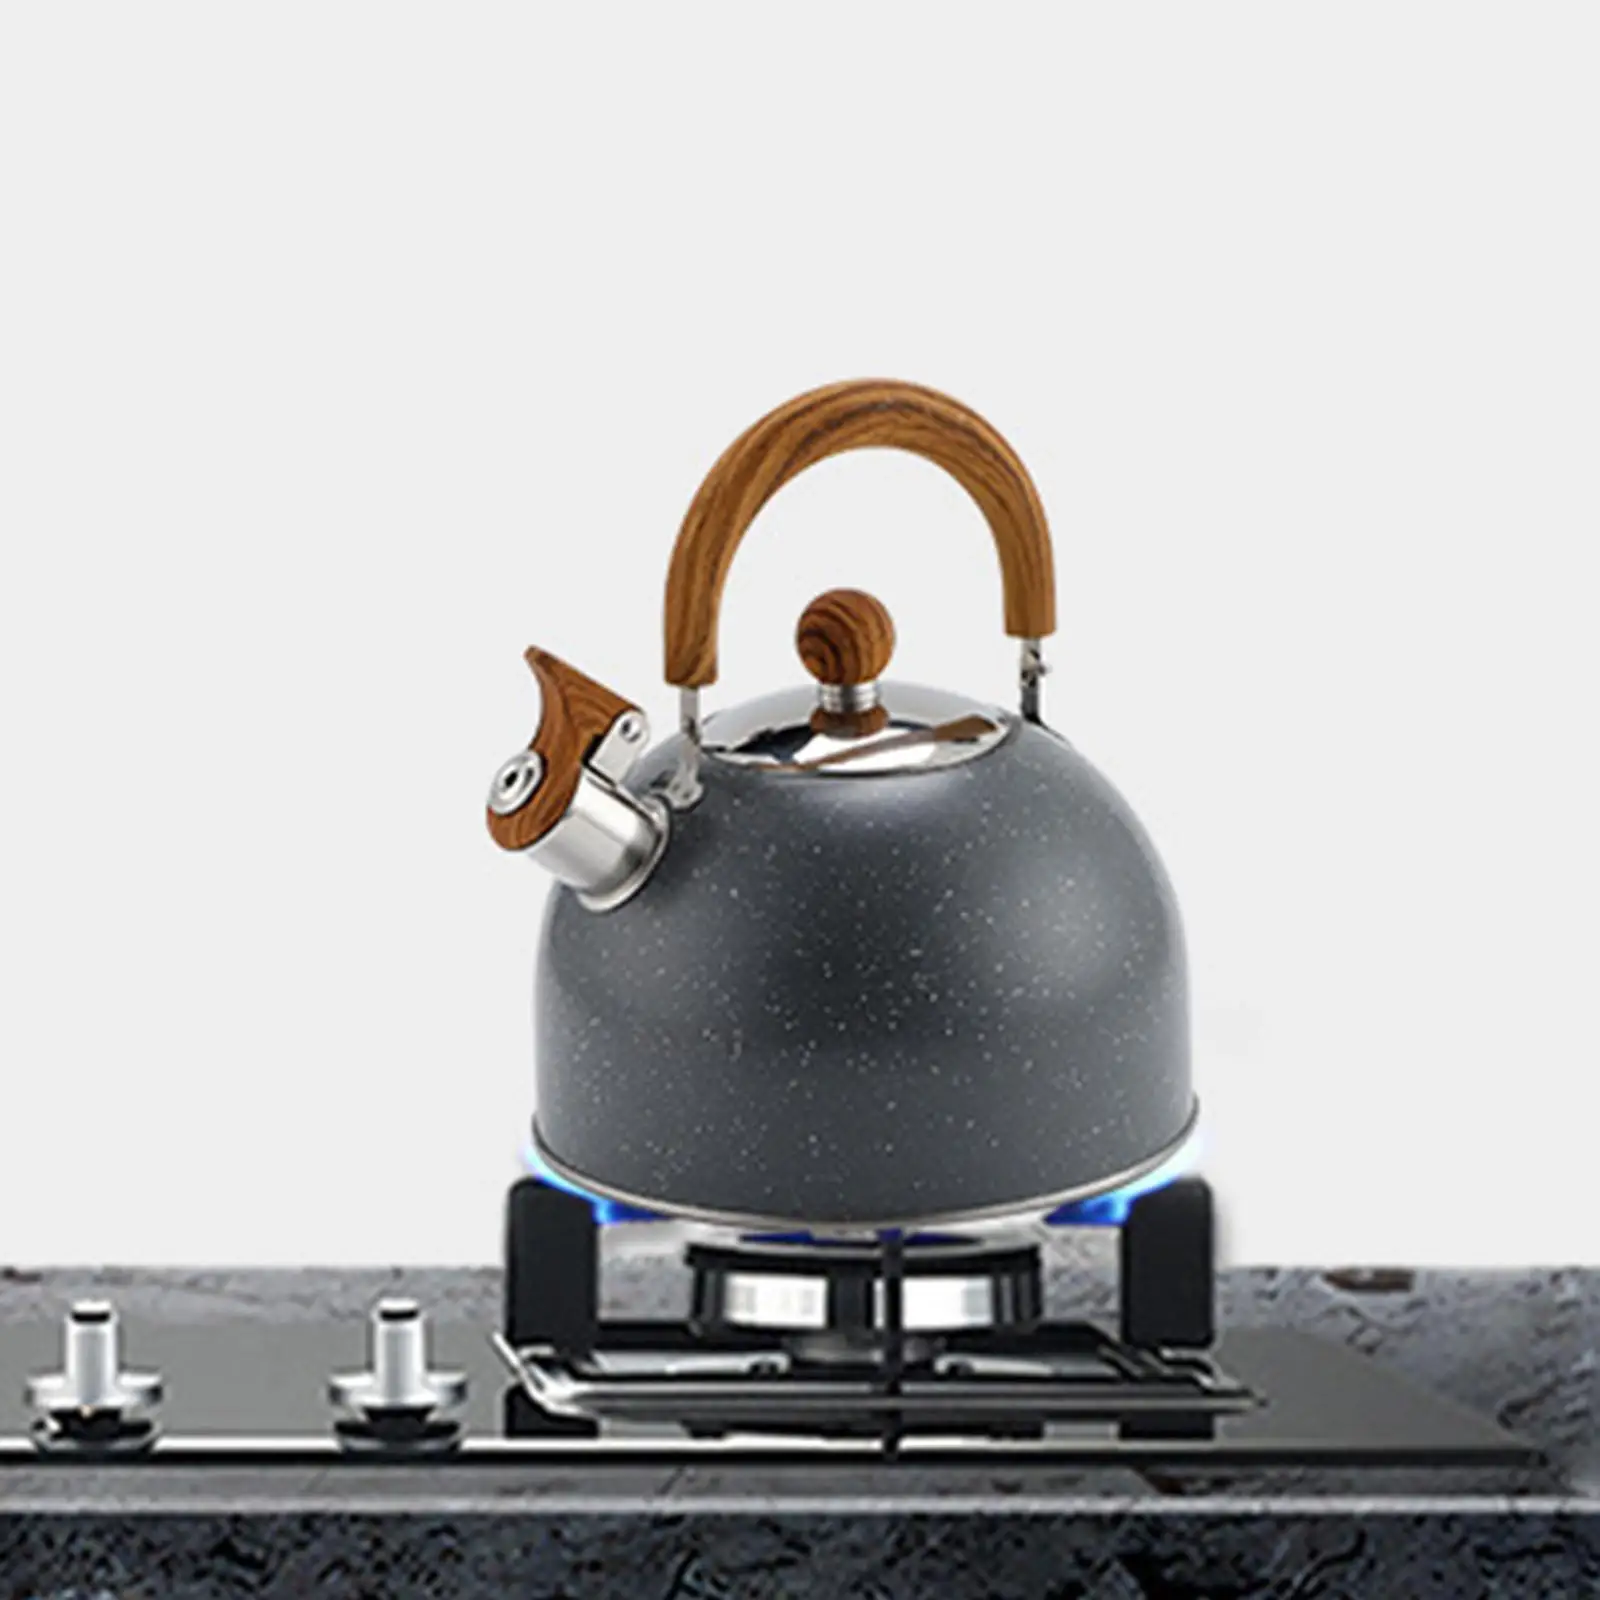 Tea Kettle, Teapot for Stovetops Wood Handle with Loud   Stainless Steel Tea Pot